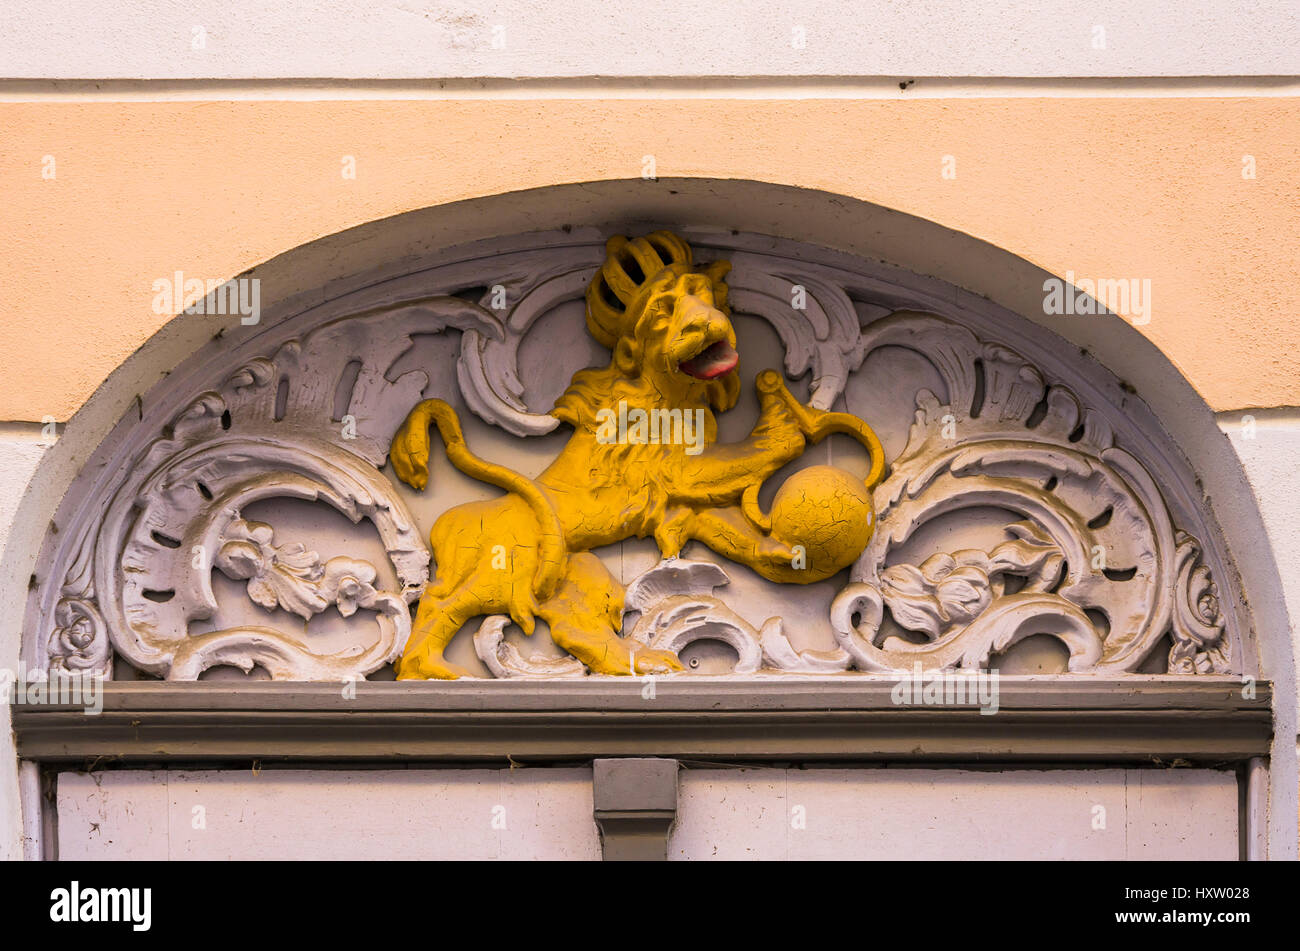 Historic round-arched door gable showing the sculpture of a lion, Hanseatic City of Stralsund, Mecklenburg-Pomerania, Germany. Stock Photo